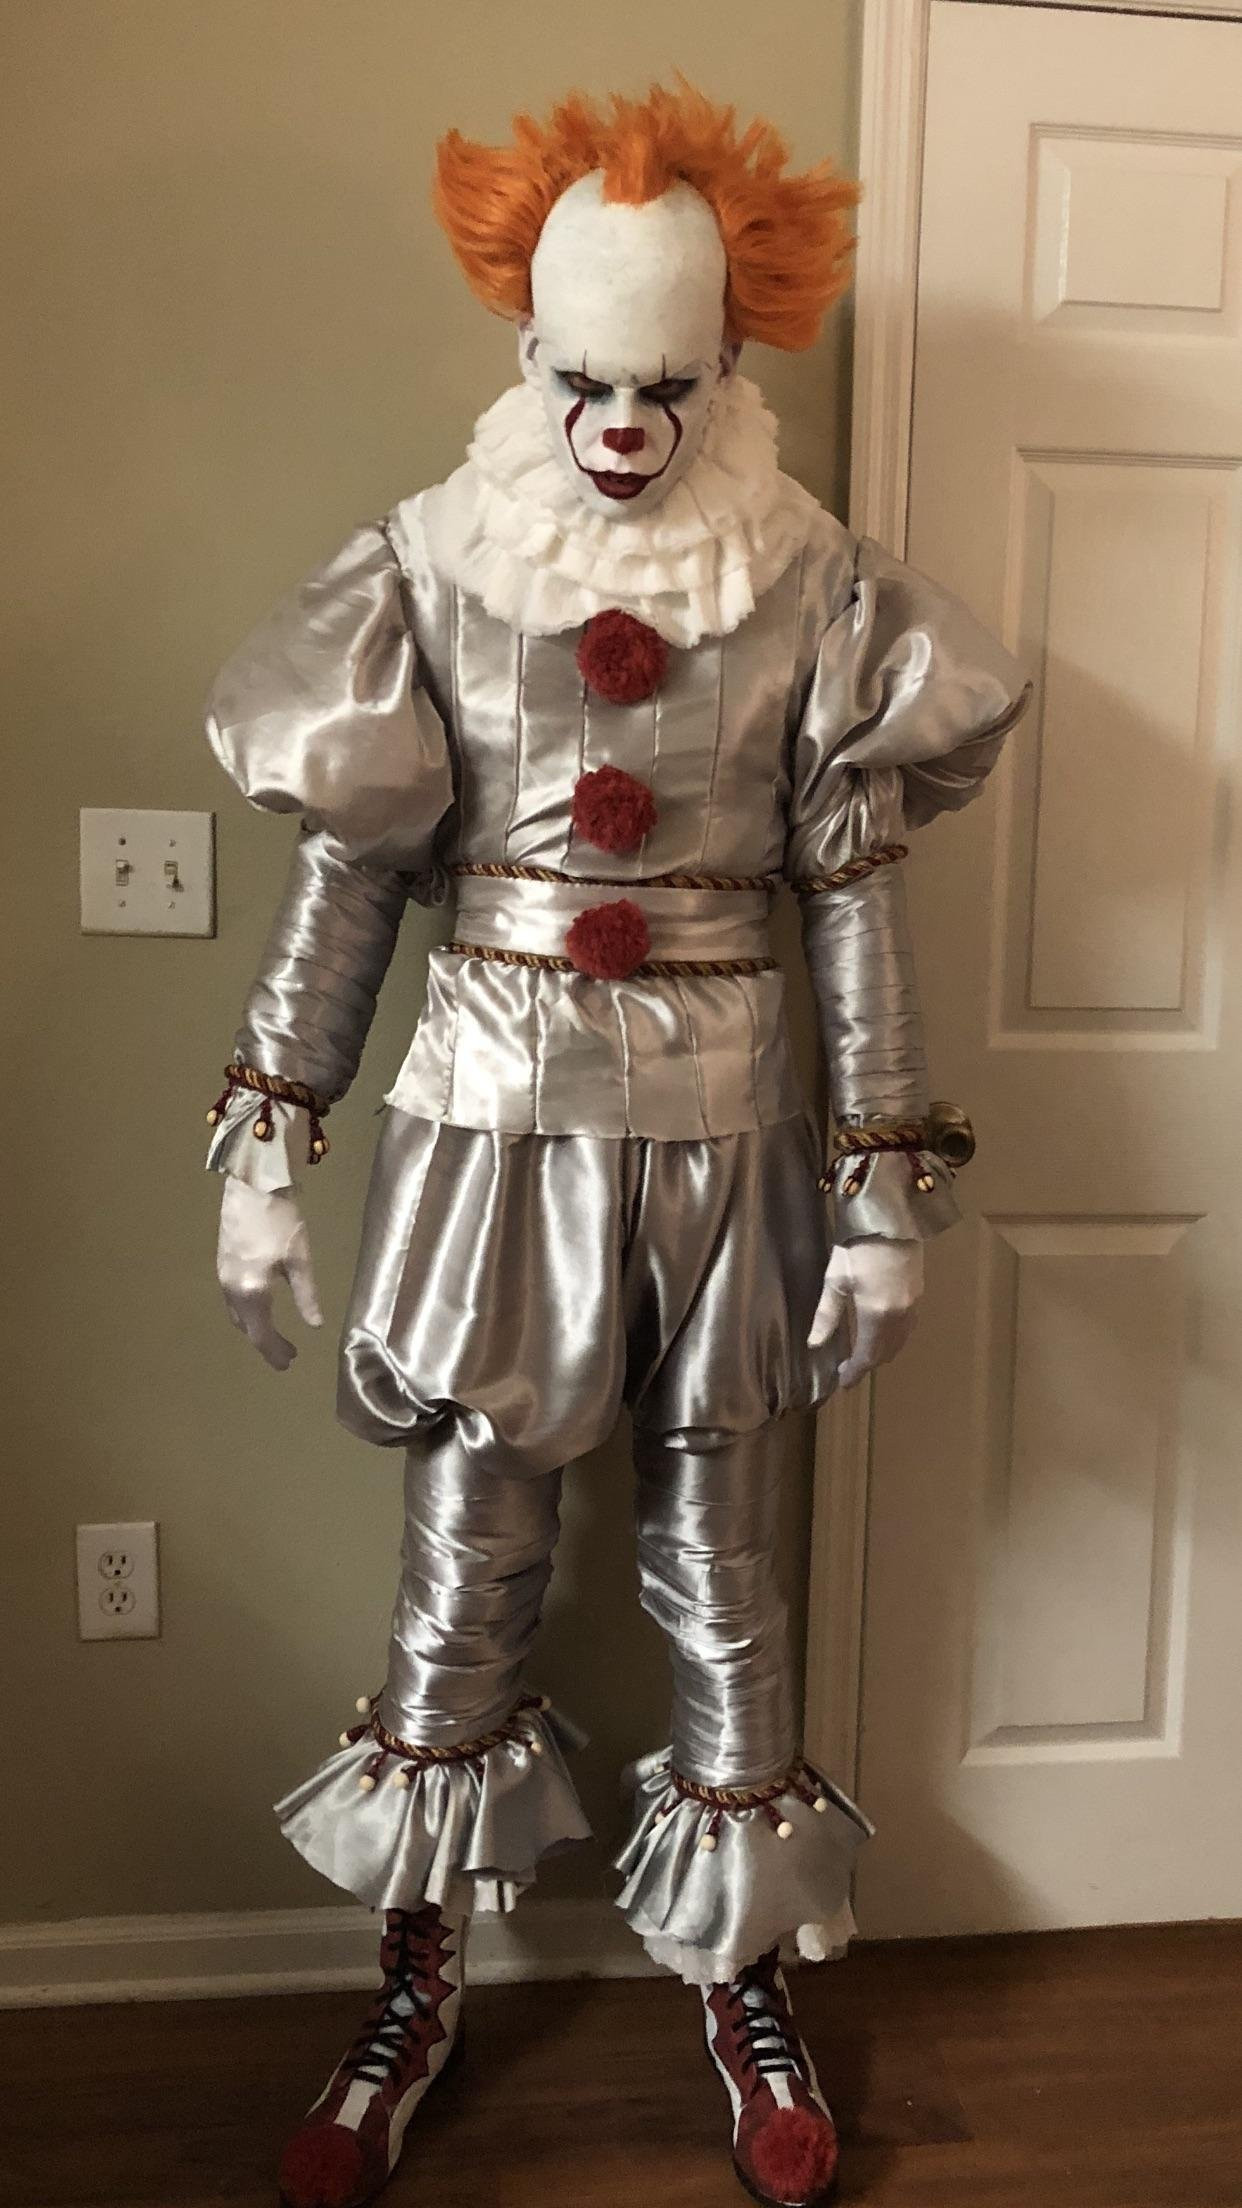 DIY Pennywise Costume
 Update Finished my Pennywise costume stephenking